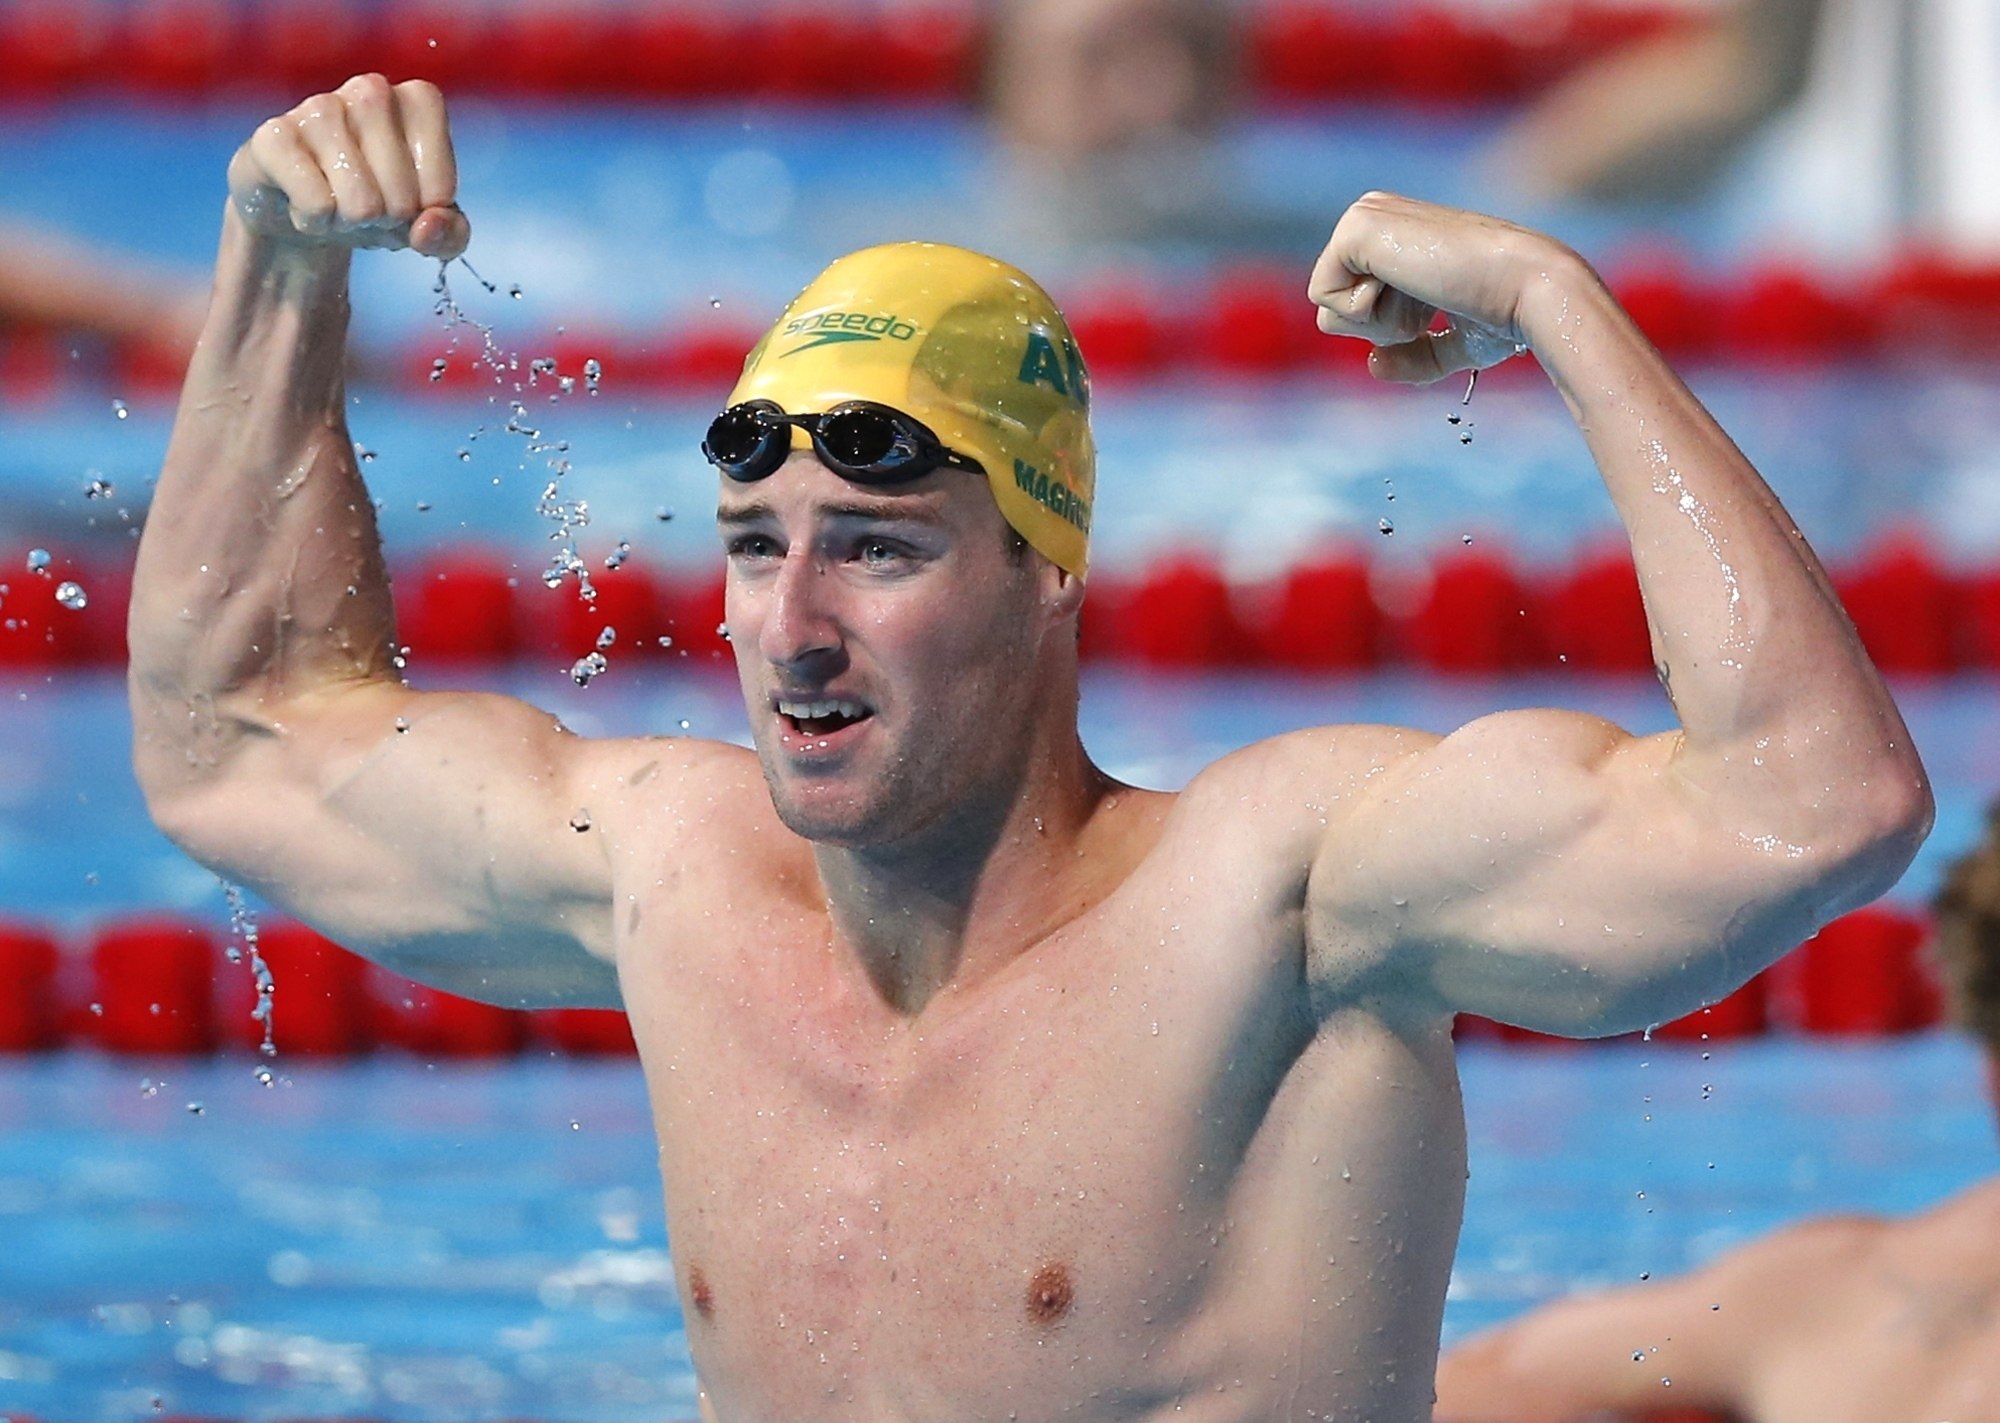 Australia’s James Magnussen celebrates after winning the gold medal in the men’s 100m freestyle final at the  Swimming World Championships in Barcelona on August 1, 2013. Photo: AP